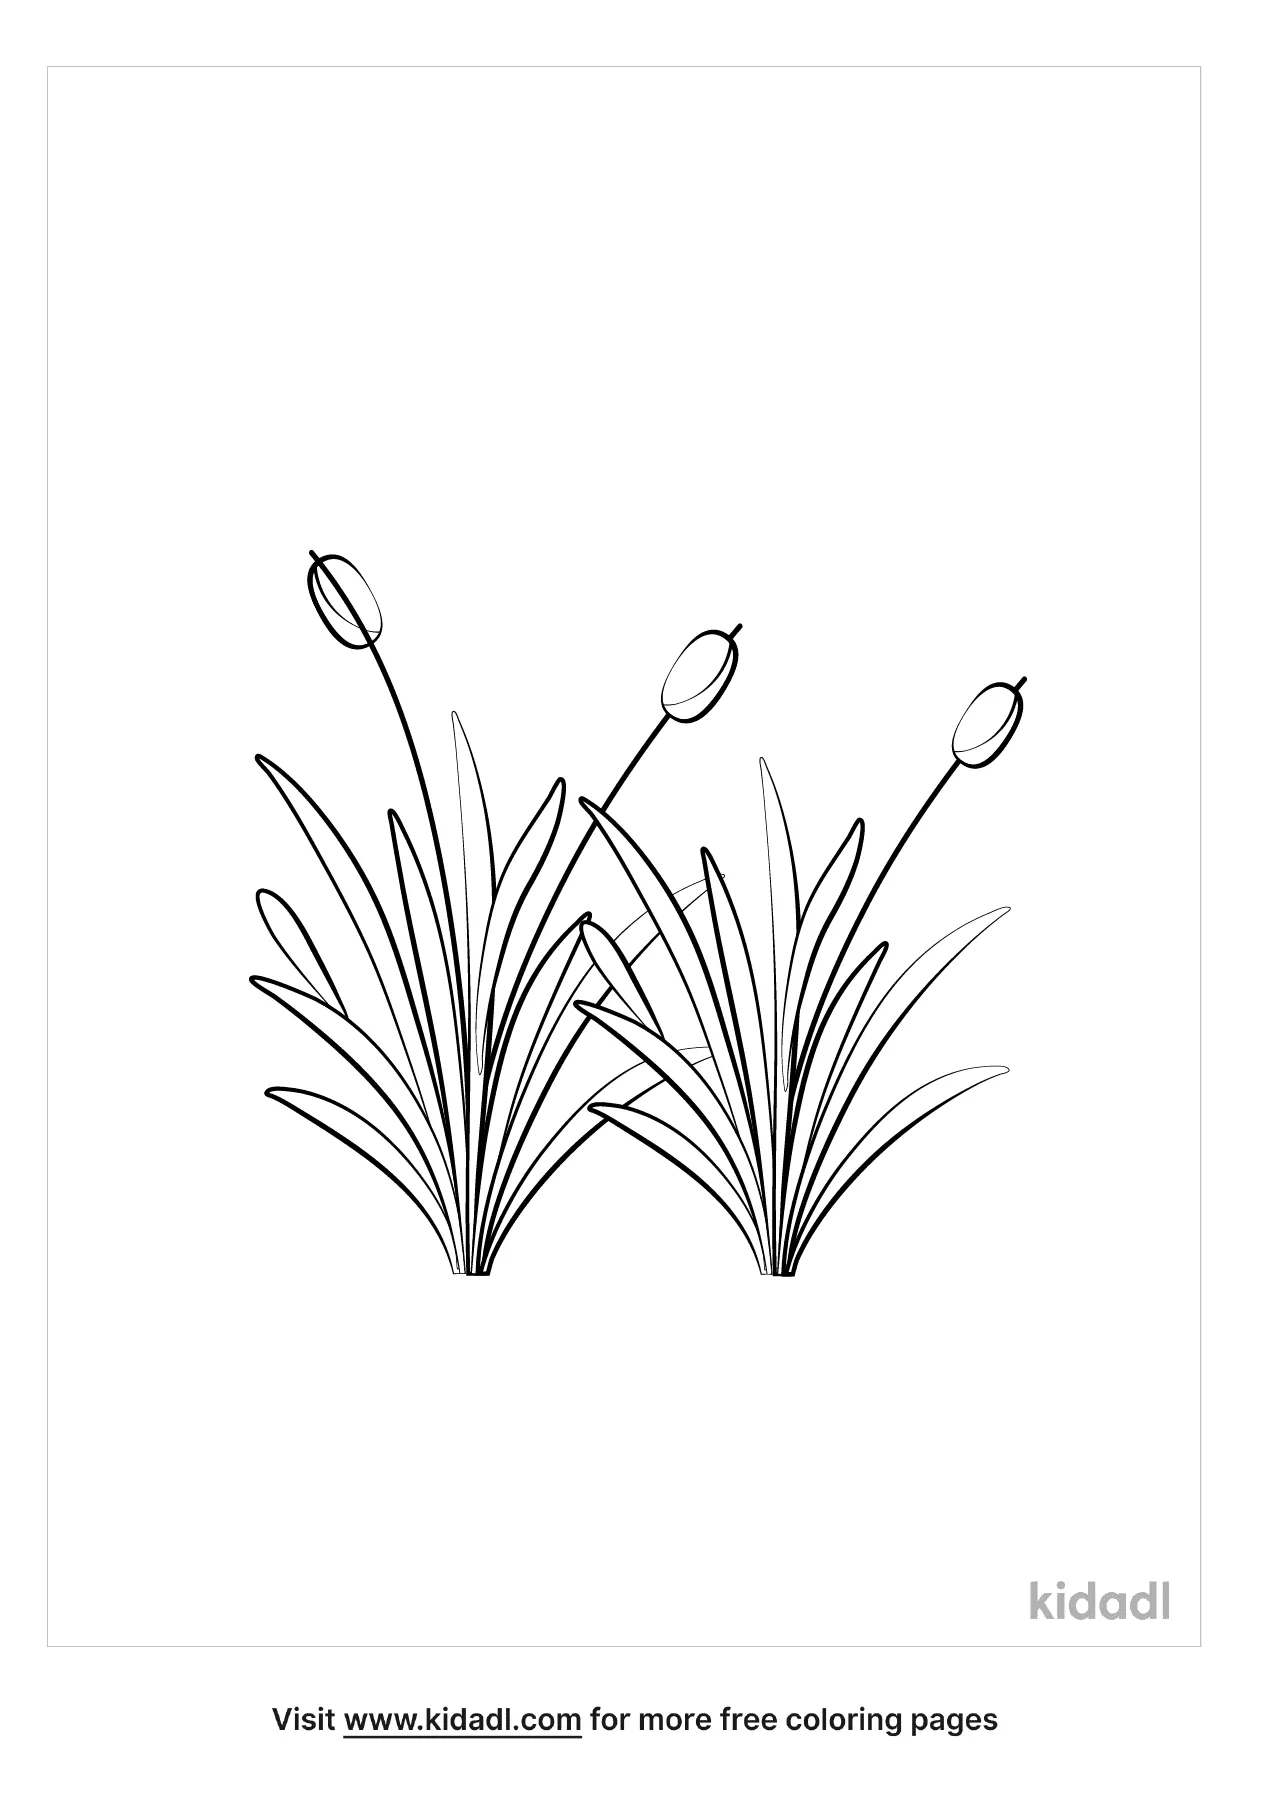 Grass Coloring Pages Free Nature Coloring Pages Kidadl